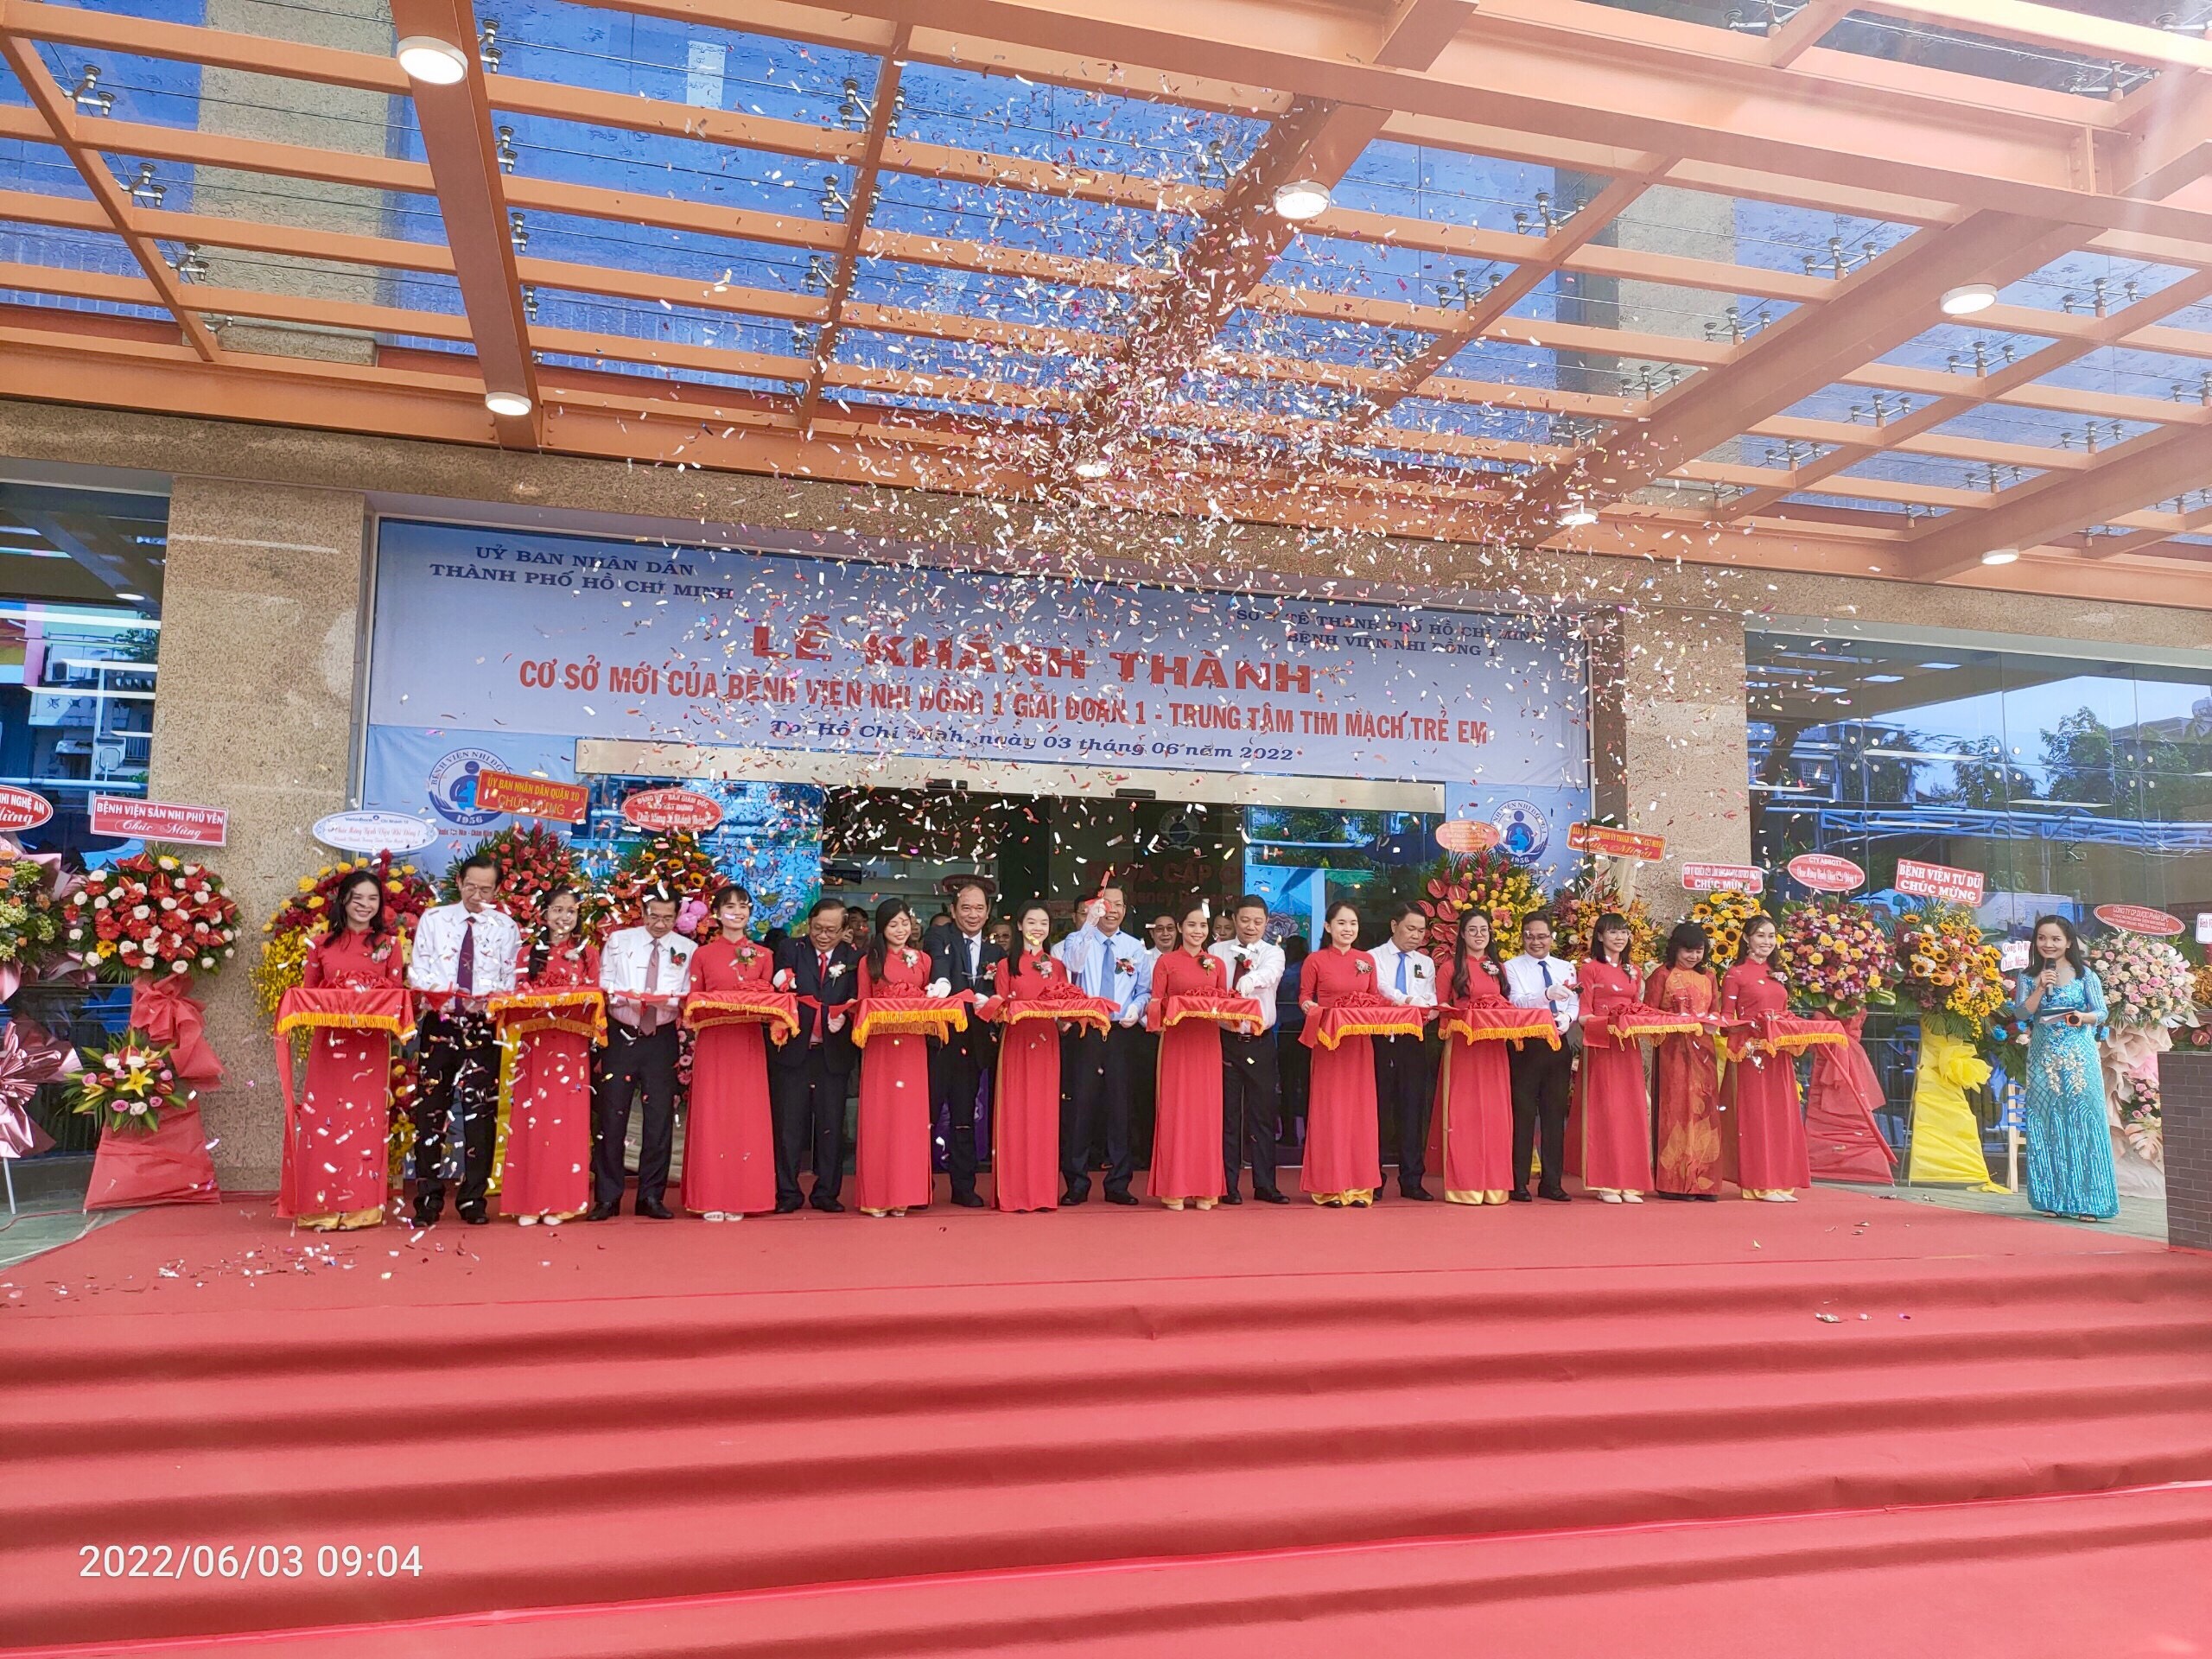 Inauguration of the New Establishment of Children's Hospital 1, Sao Bac Dau is honored to be a Partner to provide technology solutions for the Project